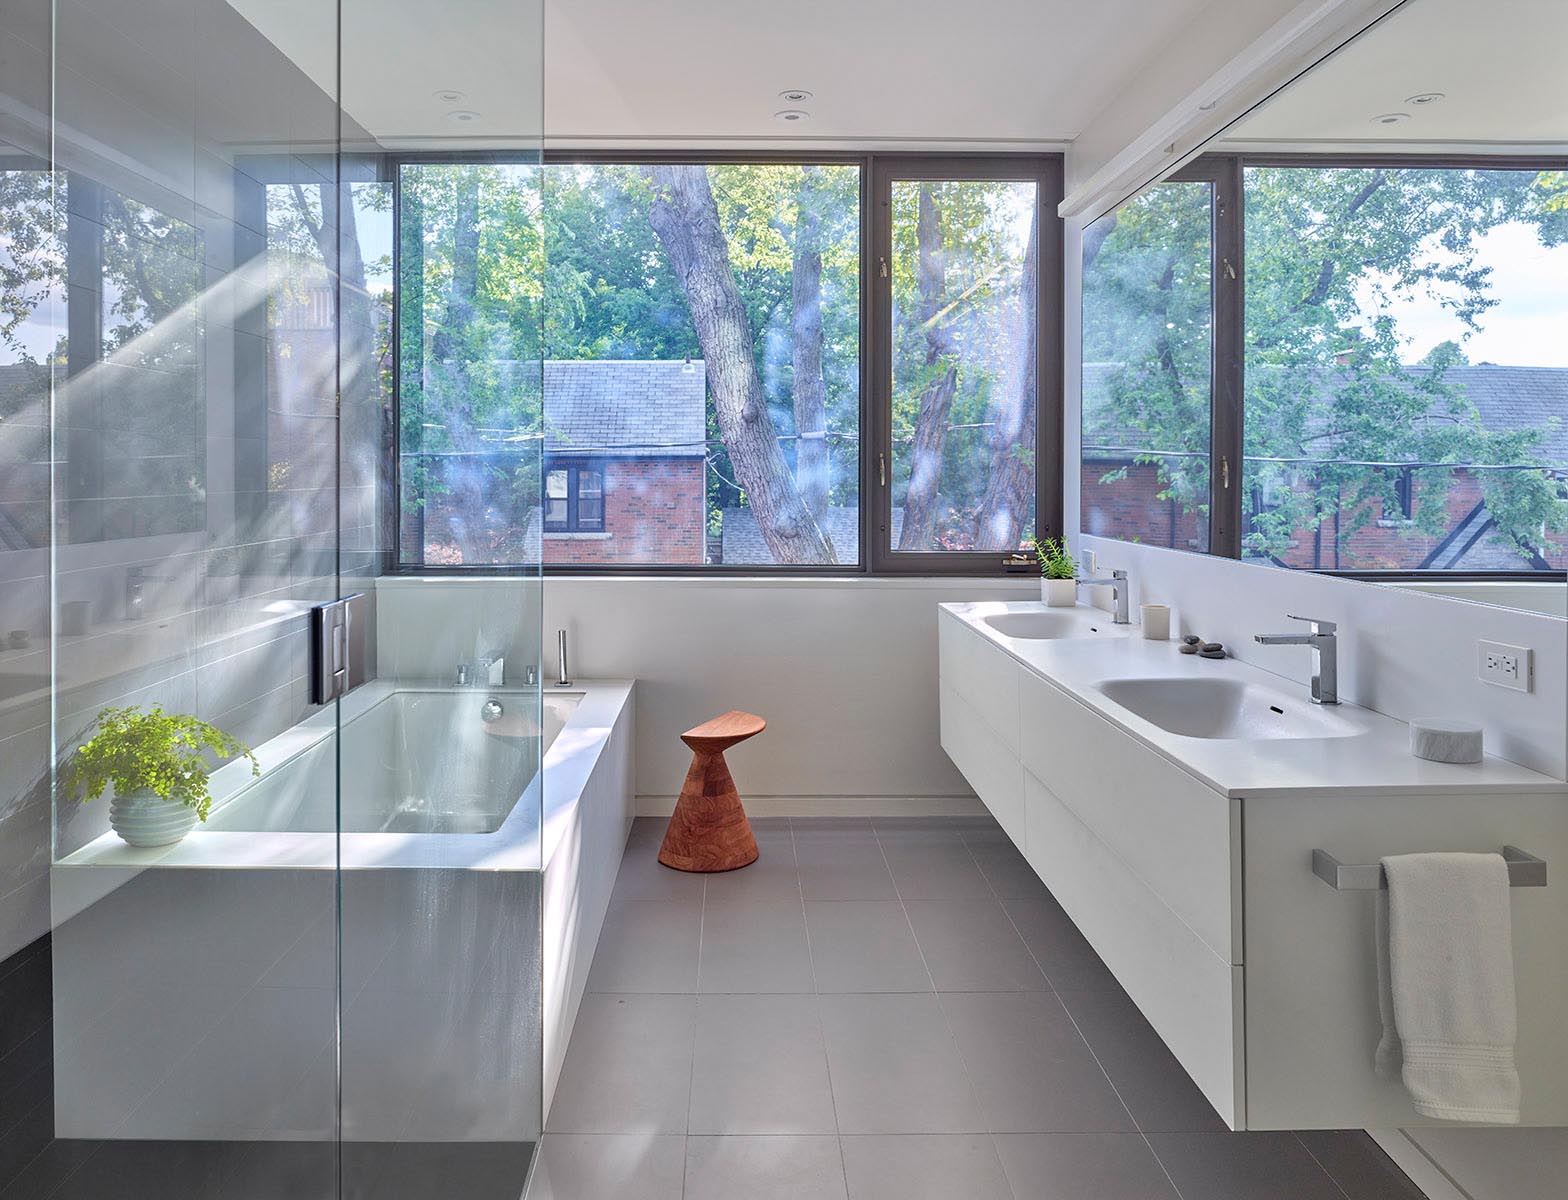 In this modern bathroom, a floating white vanity lines the wall, while the opposite wall is home to a built-in bathtub and a glass enclosed shower.